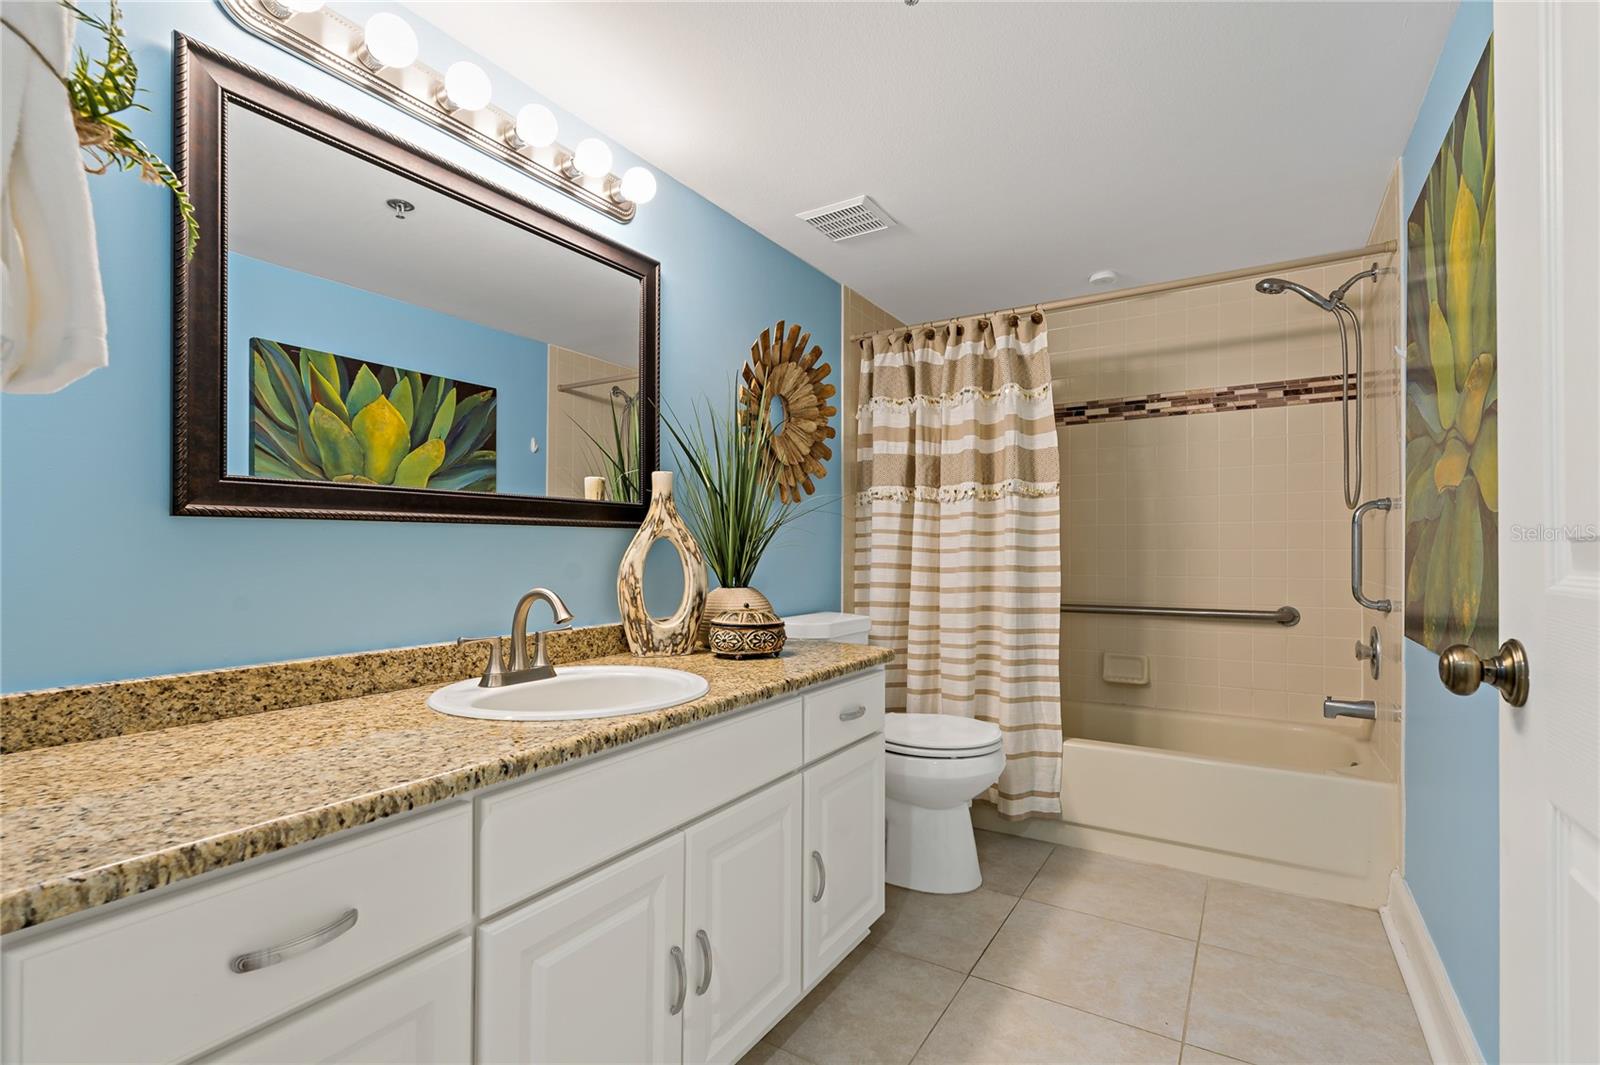 GUEST BATHROOM WITH SOAKING TUB/SHOWER COMBO!